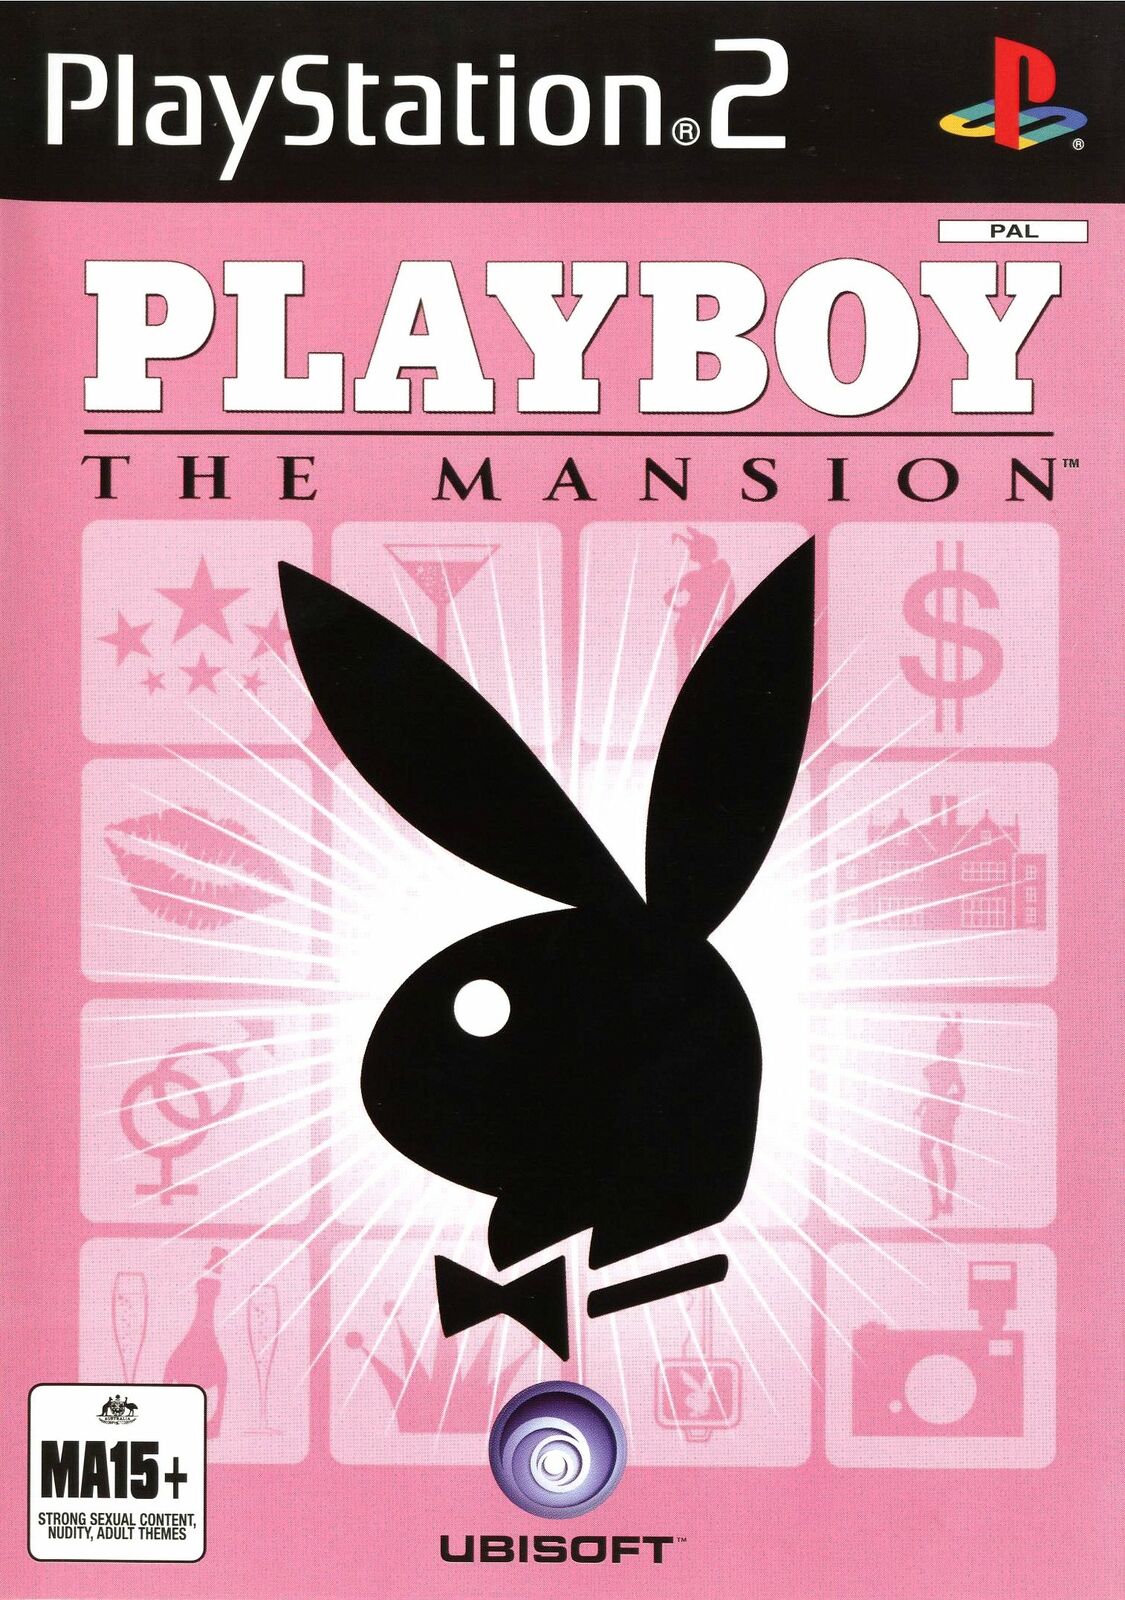 Game | Sony PlayStation PS2 | Playboy The Mansion